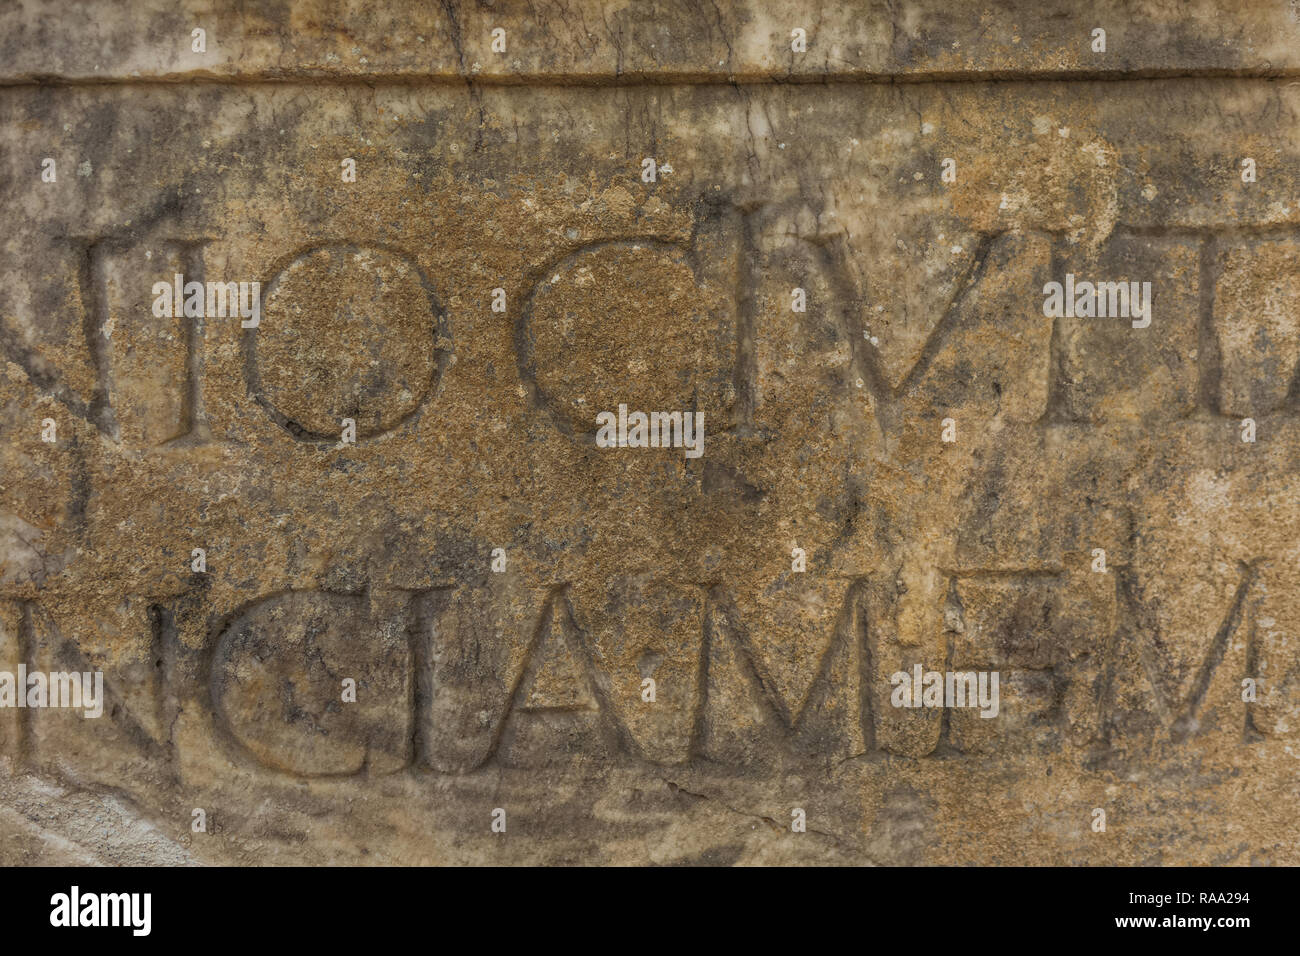 Real ancient letters cutted in stony wall of ancient architecture found during excavations of ancient ruins. Horizontal color photography. Stock Photo